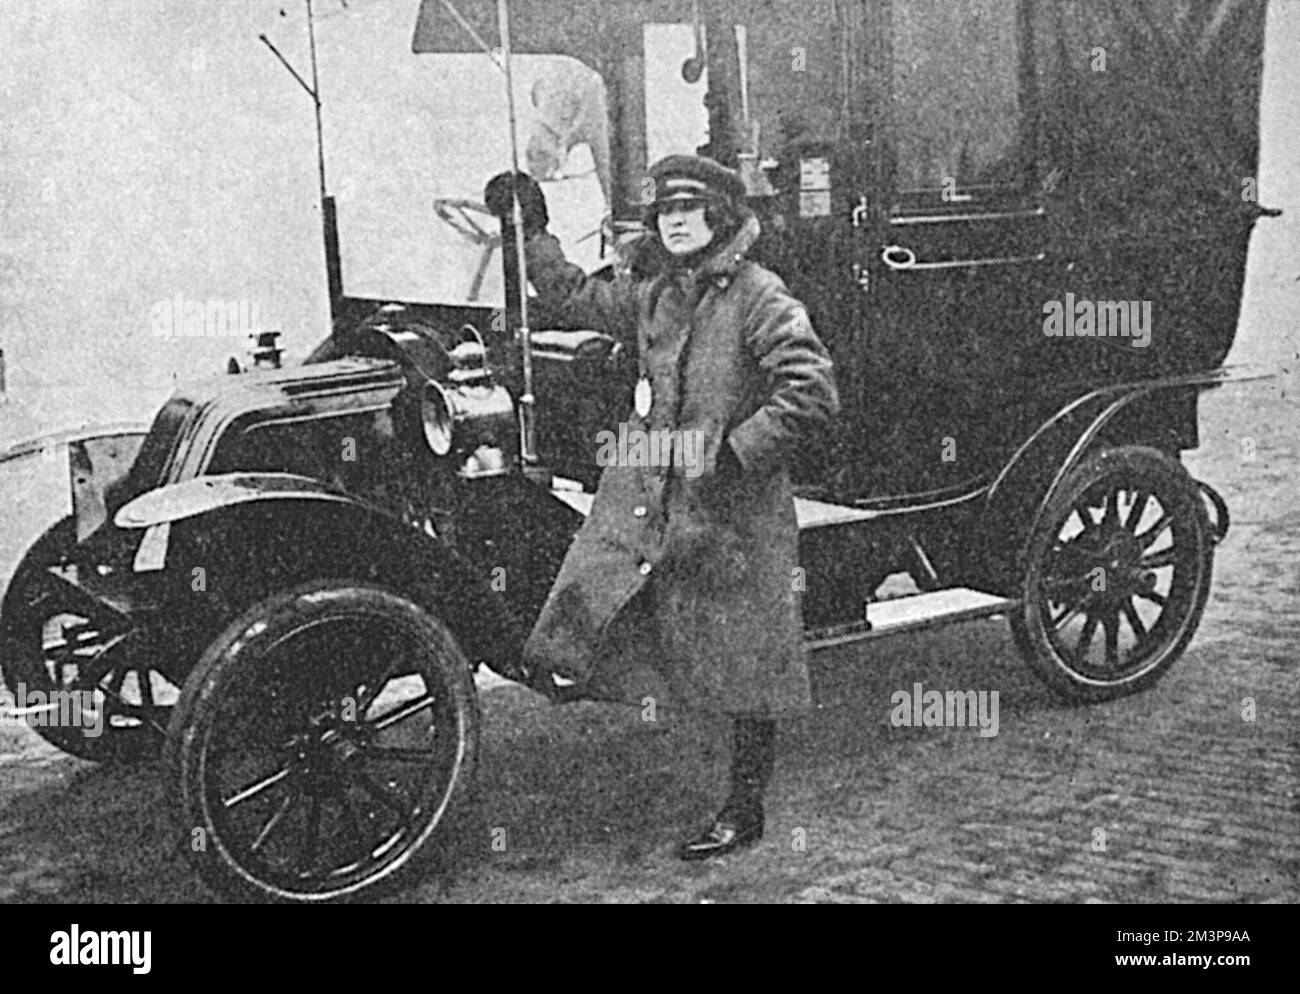 Miss Susan Dudley Ryder, who had the distinction of being London's first female taxi driver, aving passed all the driving tests.  She was a cousin of Lord Harrowby and a sister of Mrs Gavin, the champion lady golfer.       Date: 1917 Stock Photo